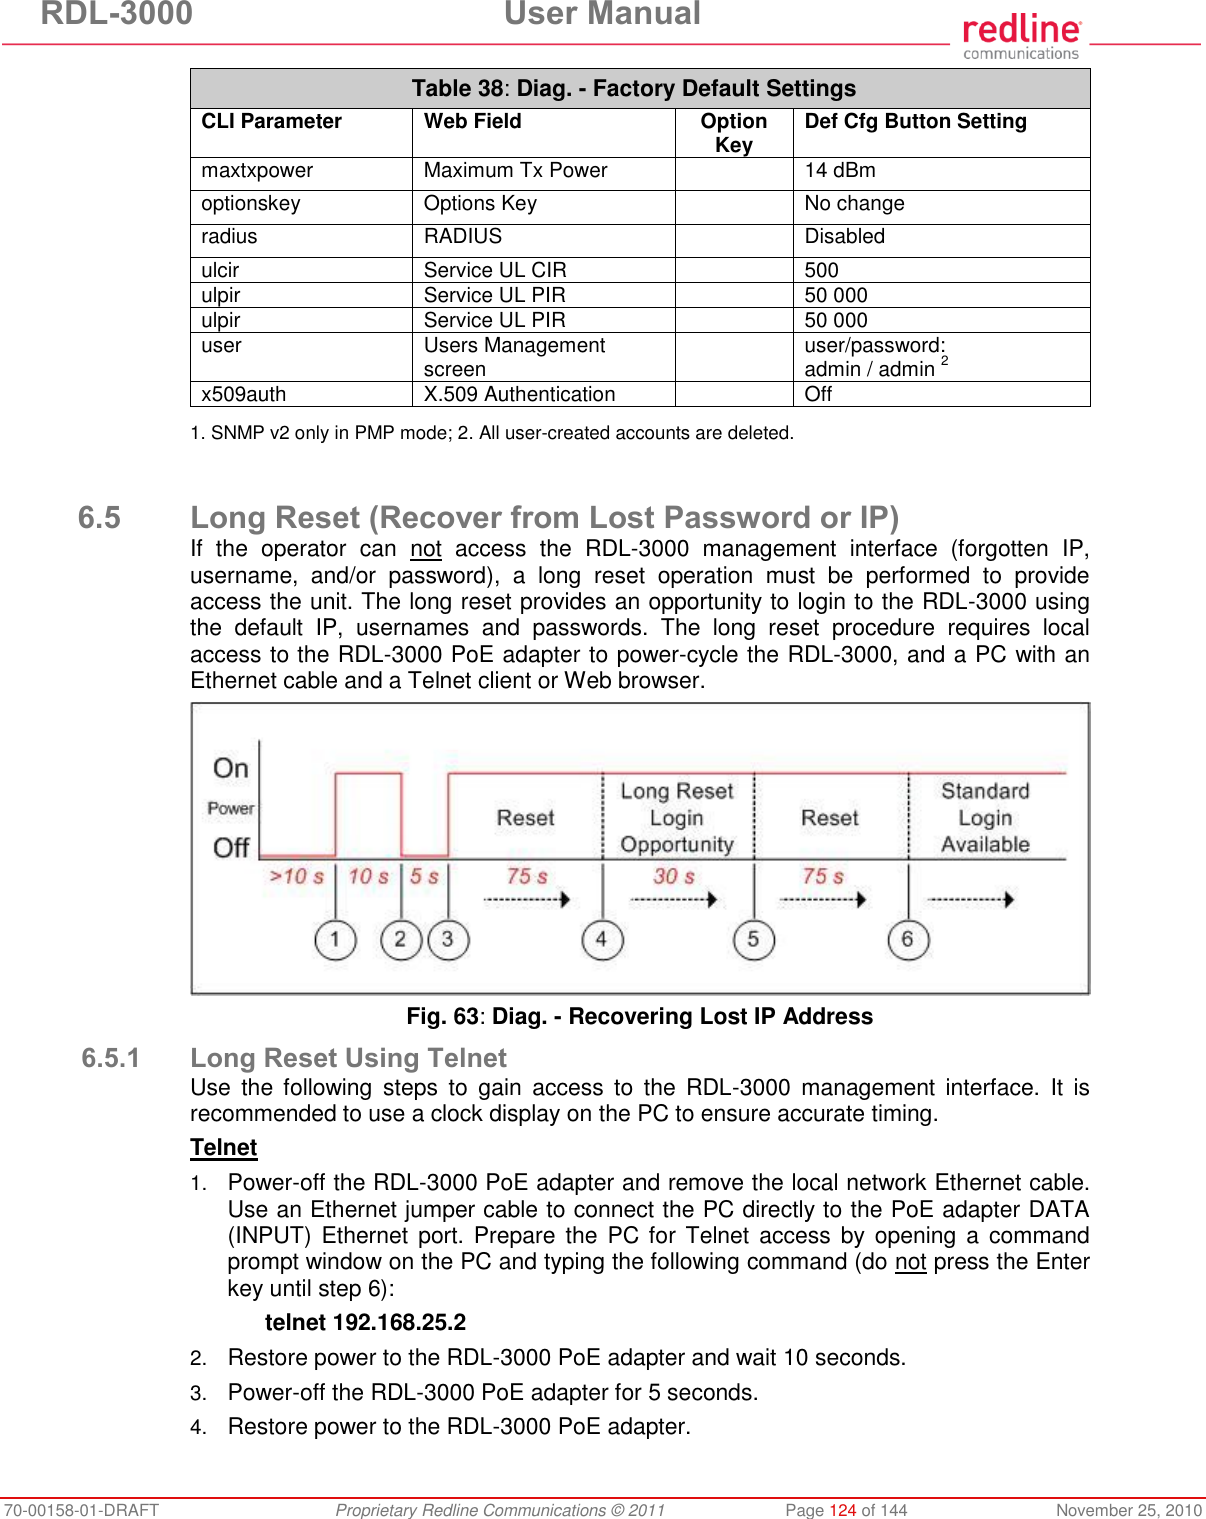 RDL-3000  User Manual 70-00158-01-DRAFT  Proprietary Redline Communications © 2011  Page 124 of 144  November 25, 2010 Table 38: Diag. - Factory Default Settings CLI Parameter Web Field Option Key Def Cfg Button Setting maxtxpower Maximum Tx Power  14 dBm optionskey Options Key  No change radius RADIUS  Disabled ulcir Service UL CIR  500 ulpir Service UL PIR  50 000 ulpir Service UL PIR  50 000 user Users Management screen  user/password: admin / admin 2 x509auth X.509 Authentication  Off  1. SNMP v2 only in PMP mode; 2. All user-created accounts are deleted.   6.5 Long Reset (Recover from Lost Password or IP) If  the  operator  can  not  access  the  RDL-3000  management  interface  (forgotten  IP, username,  and/or  password),  a  long  reset  operation  must  be  performed  to  provide access the unit. The long reset provides an opportunity to login to the RDL-3000 using the  default  IP,  usernames  and  passwords.  The  long  reset  procedure  requires  local access to the RDL-3000 PoE adapter to power-cycle the RDL-3000, and a PC with an Ethernet cable and a Telnet client or Web browser.   Fig. 63: Diag. - Recovering Lost IP Address 6.5.1 Long Reset Using Telnet Use  the  following  steps  to  gain  access  to  the  RDL-3000  management  interface.  It  is recommended to use a clock display on the PC to ensure accurate timing. Telnet 1. Power-off the RDL-3000 PoE adapter and remove the local network Ethernet cable. Use an Ethernet jumper cable to connect the PC directly to the PoE adapter DATA (INPUT) Ethernet port. Prepare  the  PC for  Telnet access  by opening a  command prompt window on the PC and typing the following command (do not press the Enter key until step 6):   telnet 192.168.25.2 2. Restore power to the RDL-3000 PoE adapter and wait 10 seconds. 3. Power-off the RDL-3000 PoE adapter for 5 seconds. 4. Restore power to the RDL-3000 PoE adapter. 